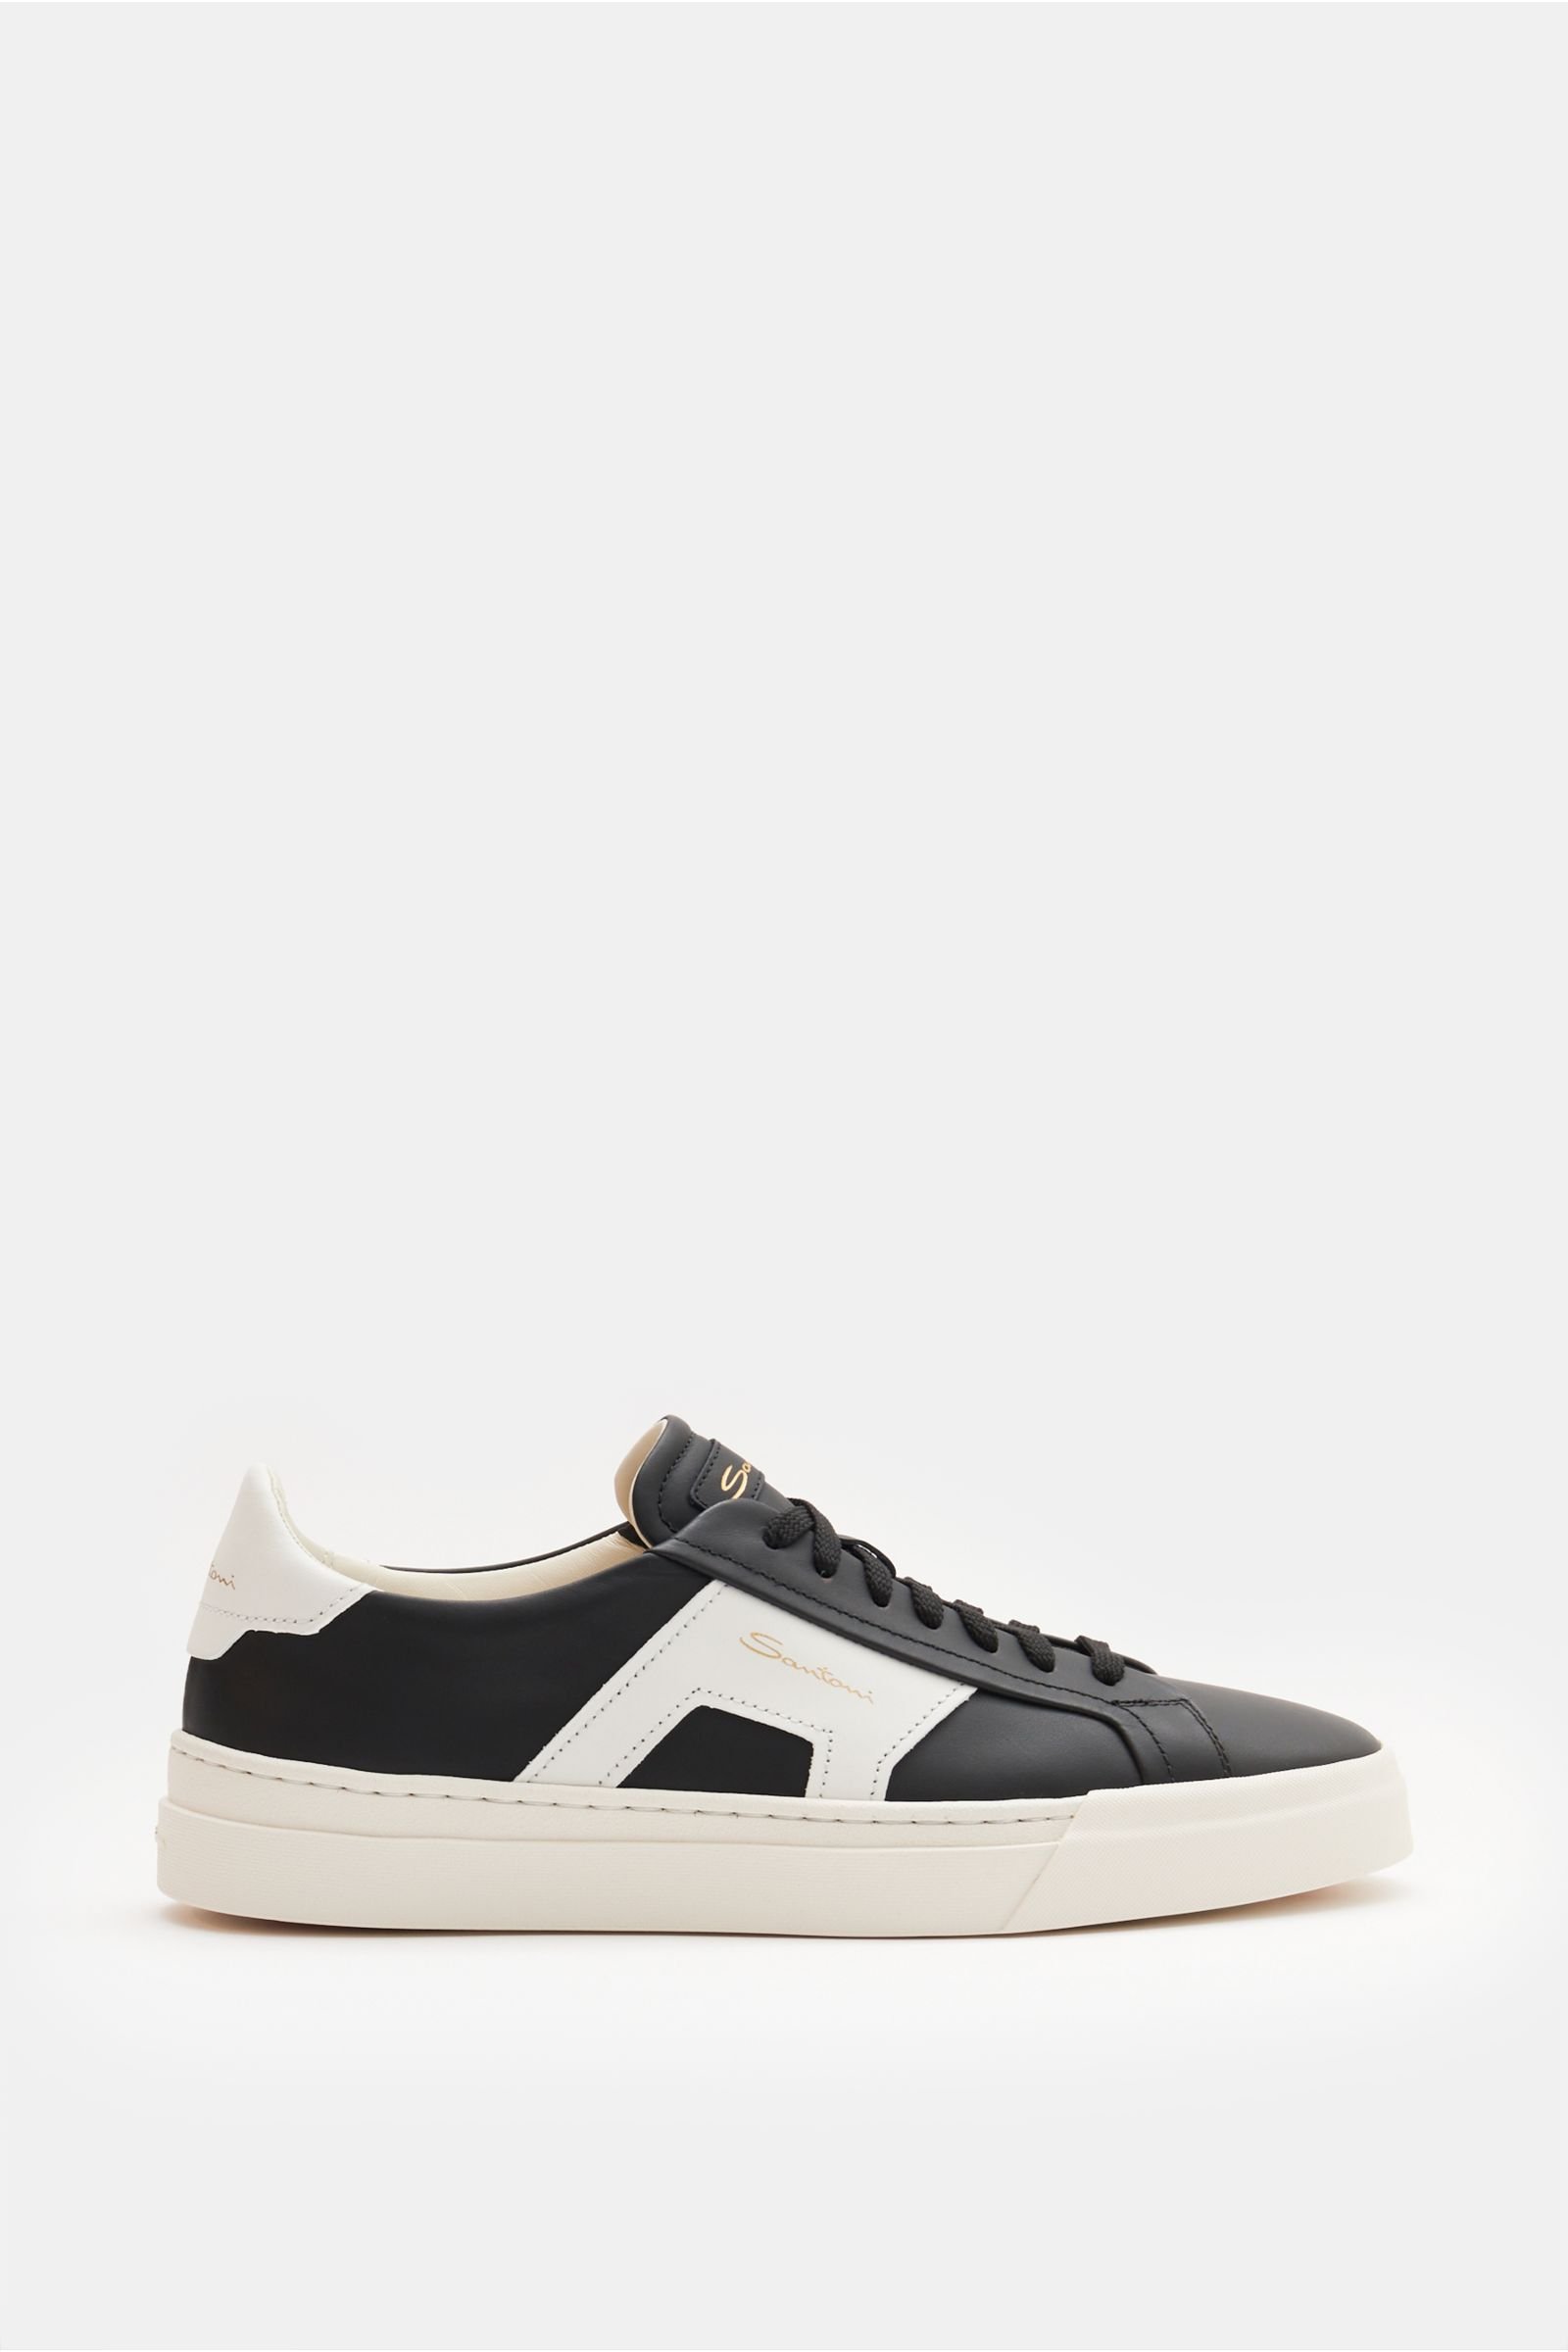 Sneakers 'Double Buckle' black/white